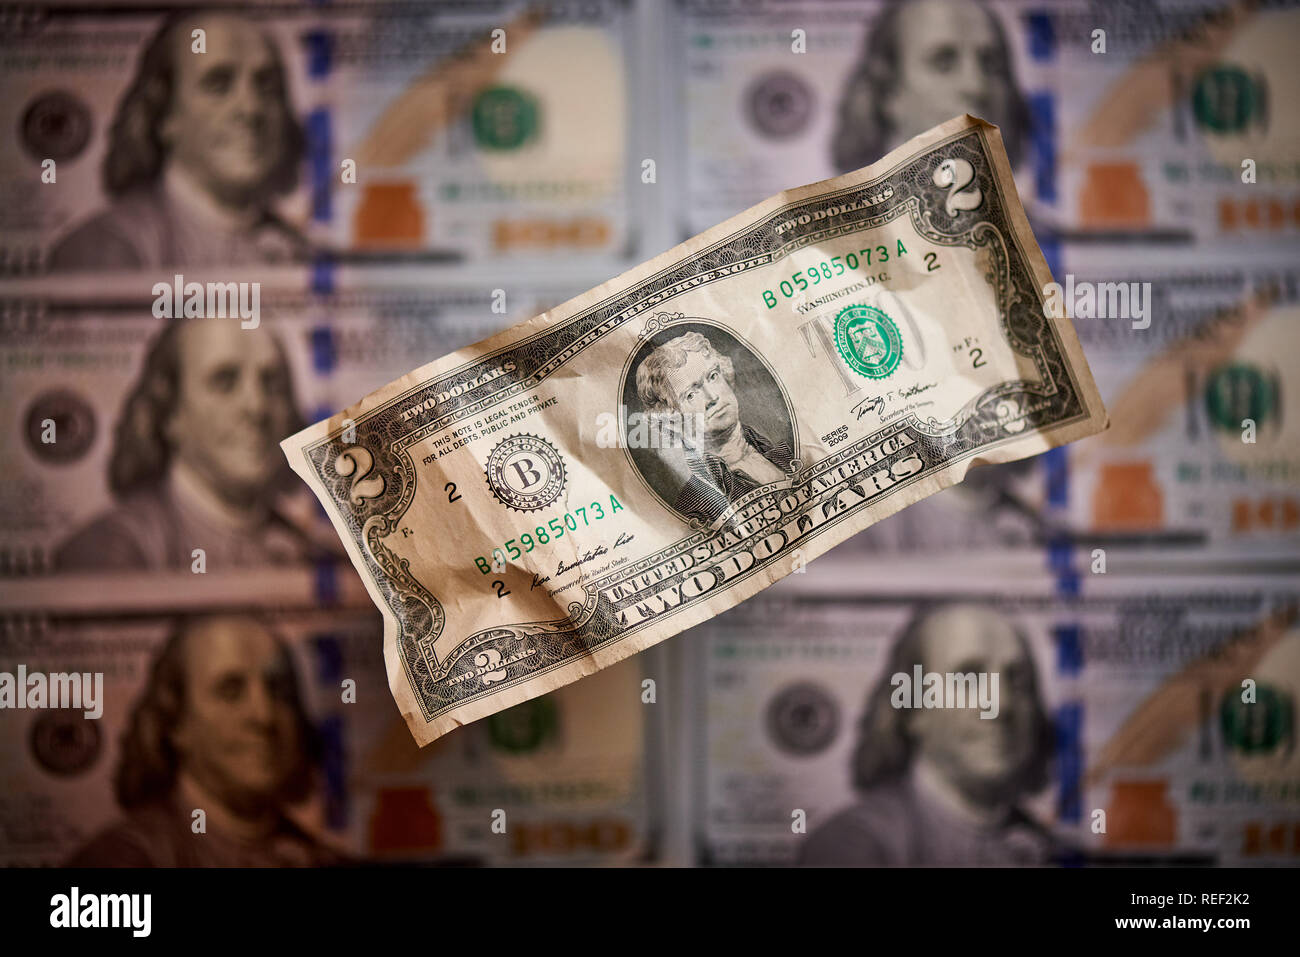 Two crumpled dollars on a blurred background of bills worth one hundred dollars the new American bill. Stock Photo